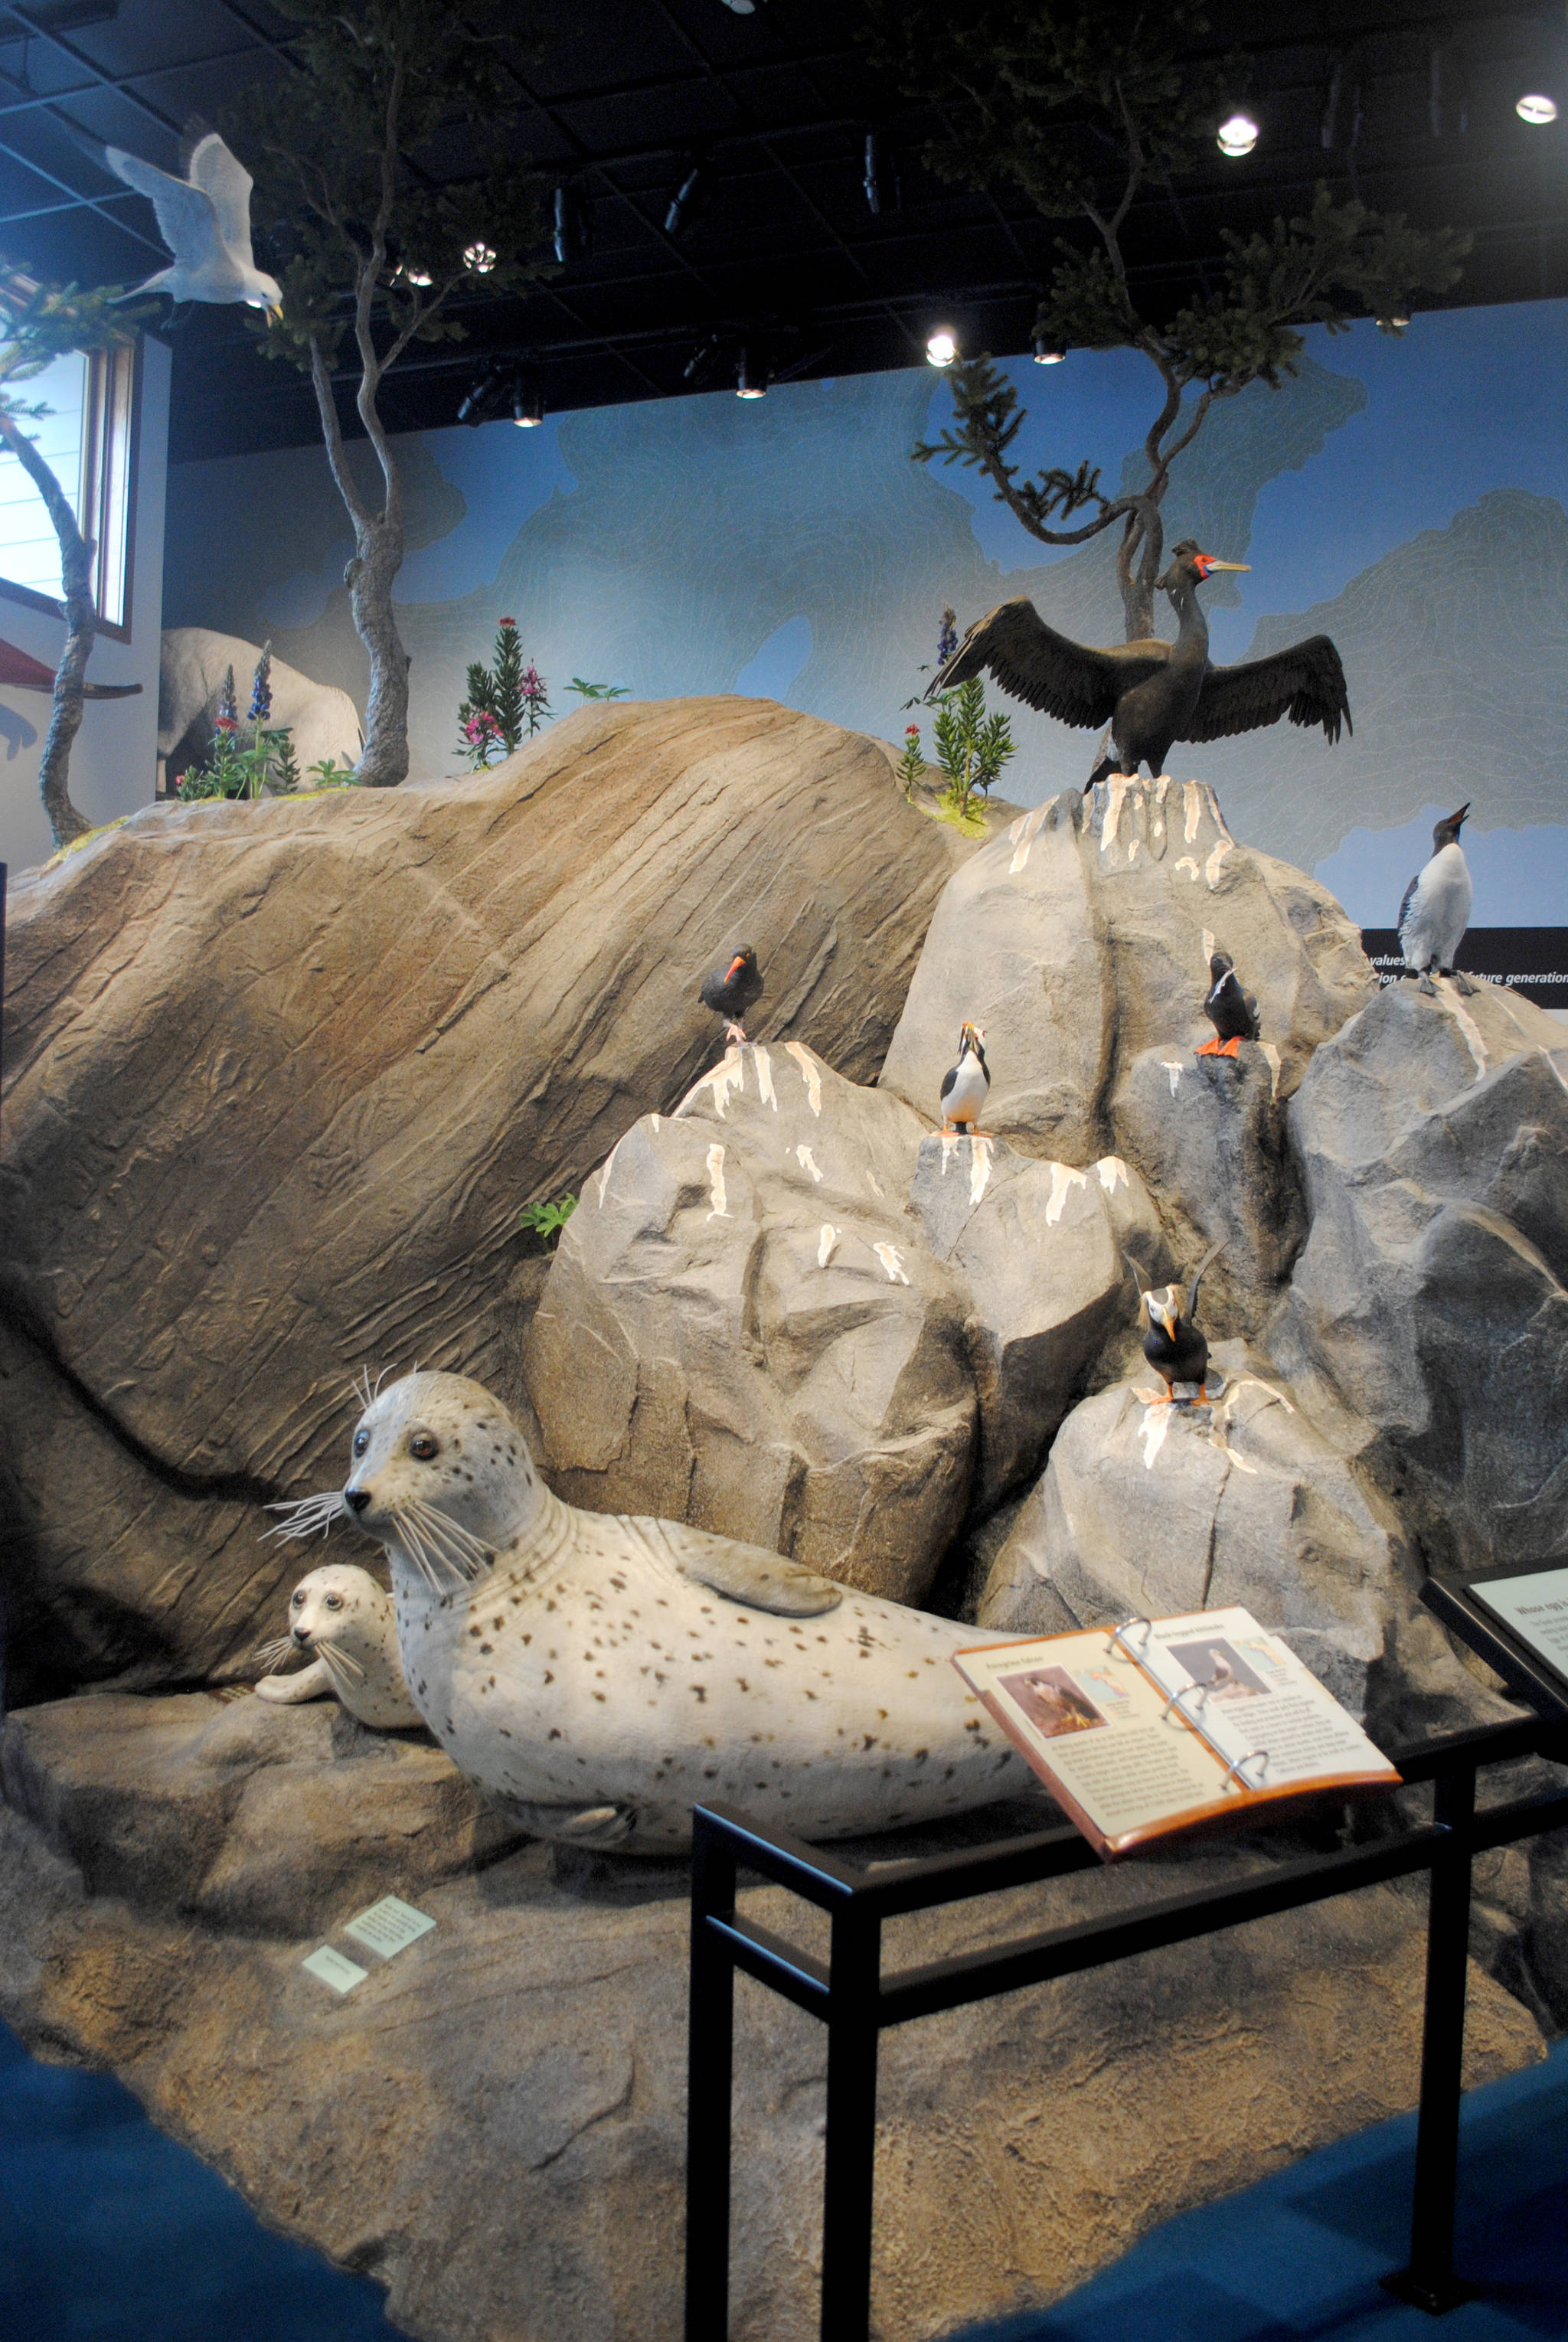 The newly renovated Kenai Fjords National Park visitor center exhibit displays different wildlife that can be found in the park. (Photo by Kat Sorensen/Peninsula Clarion)